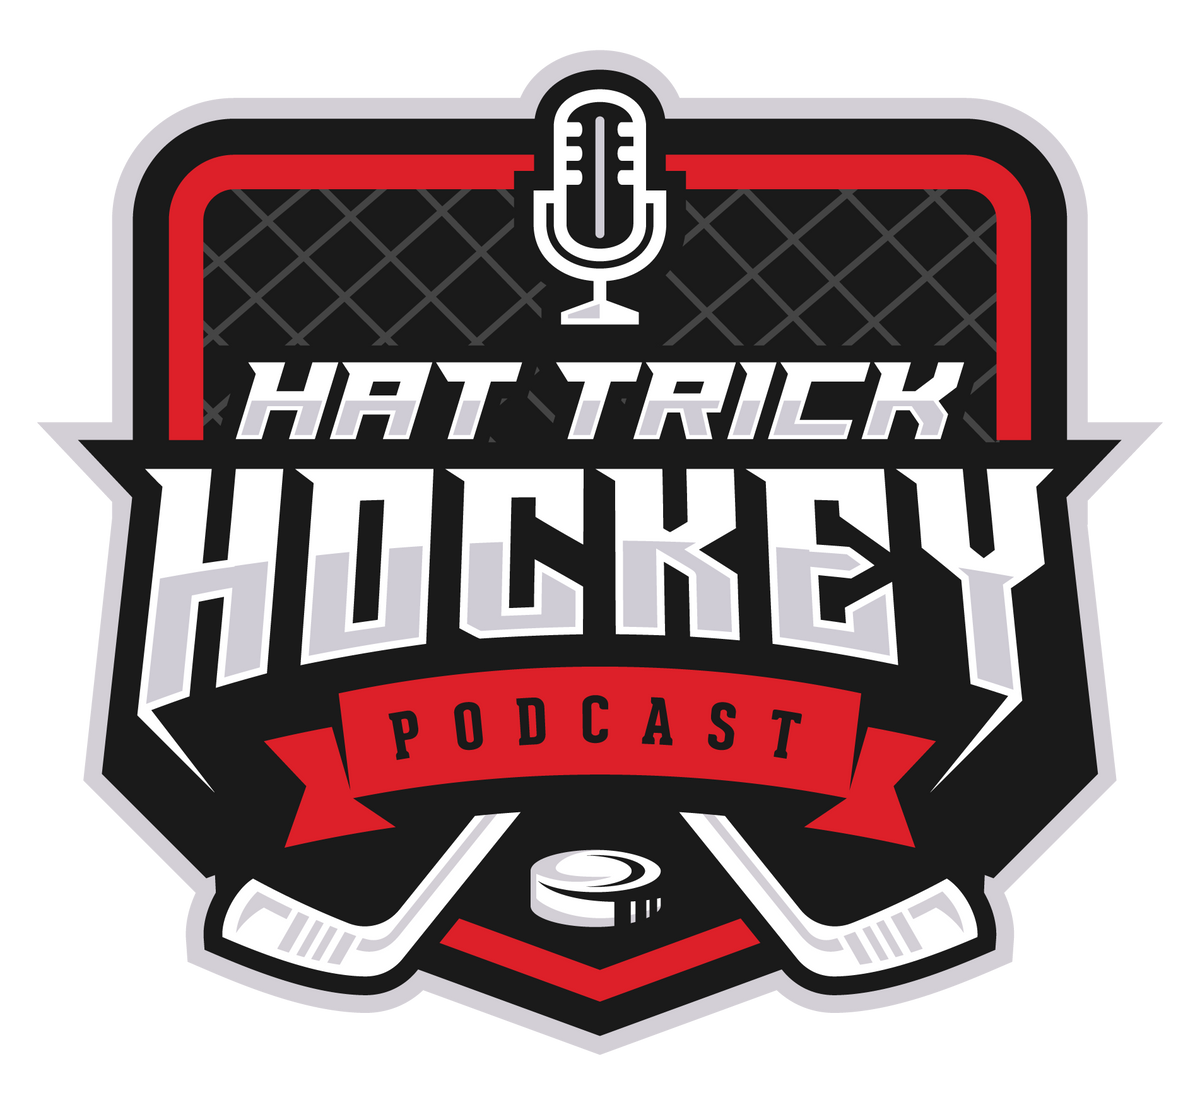 HAT TRICK HOCKEY Accurate Creations